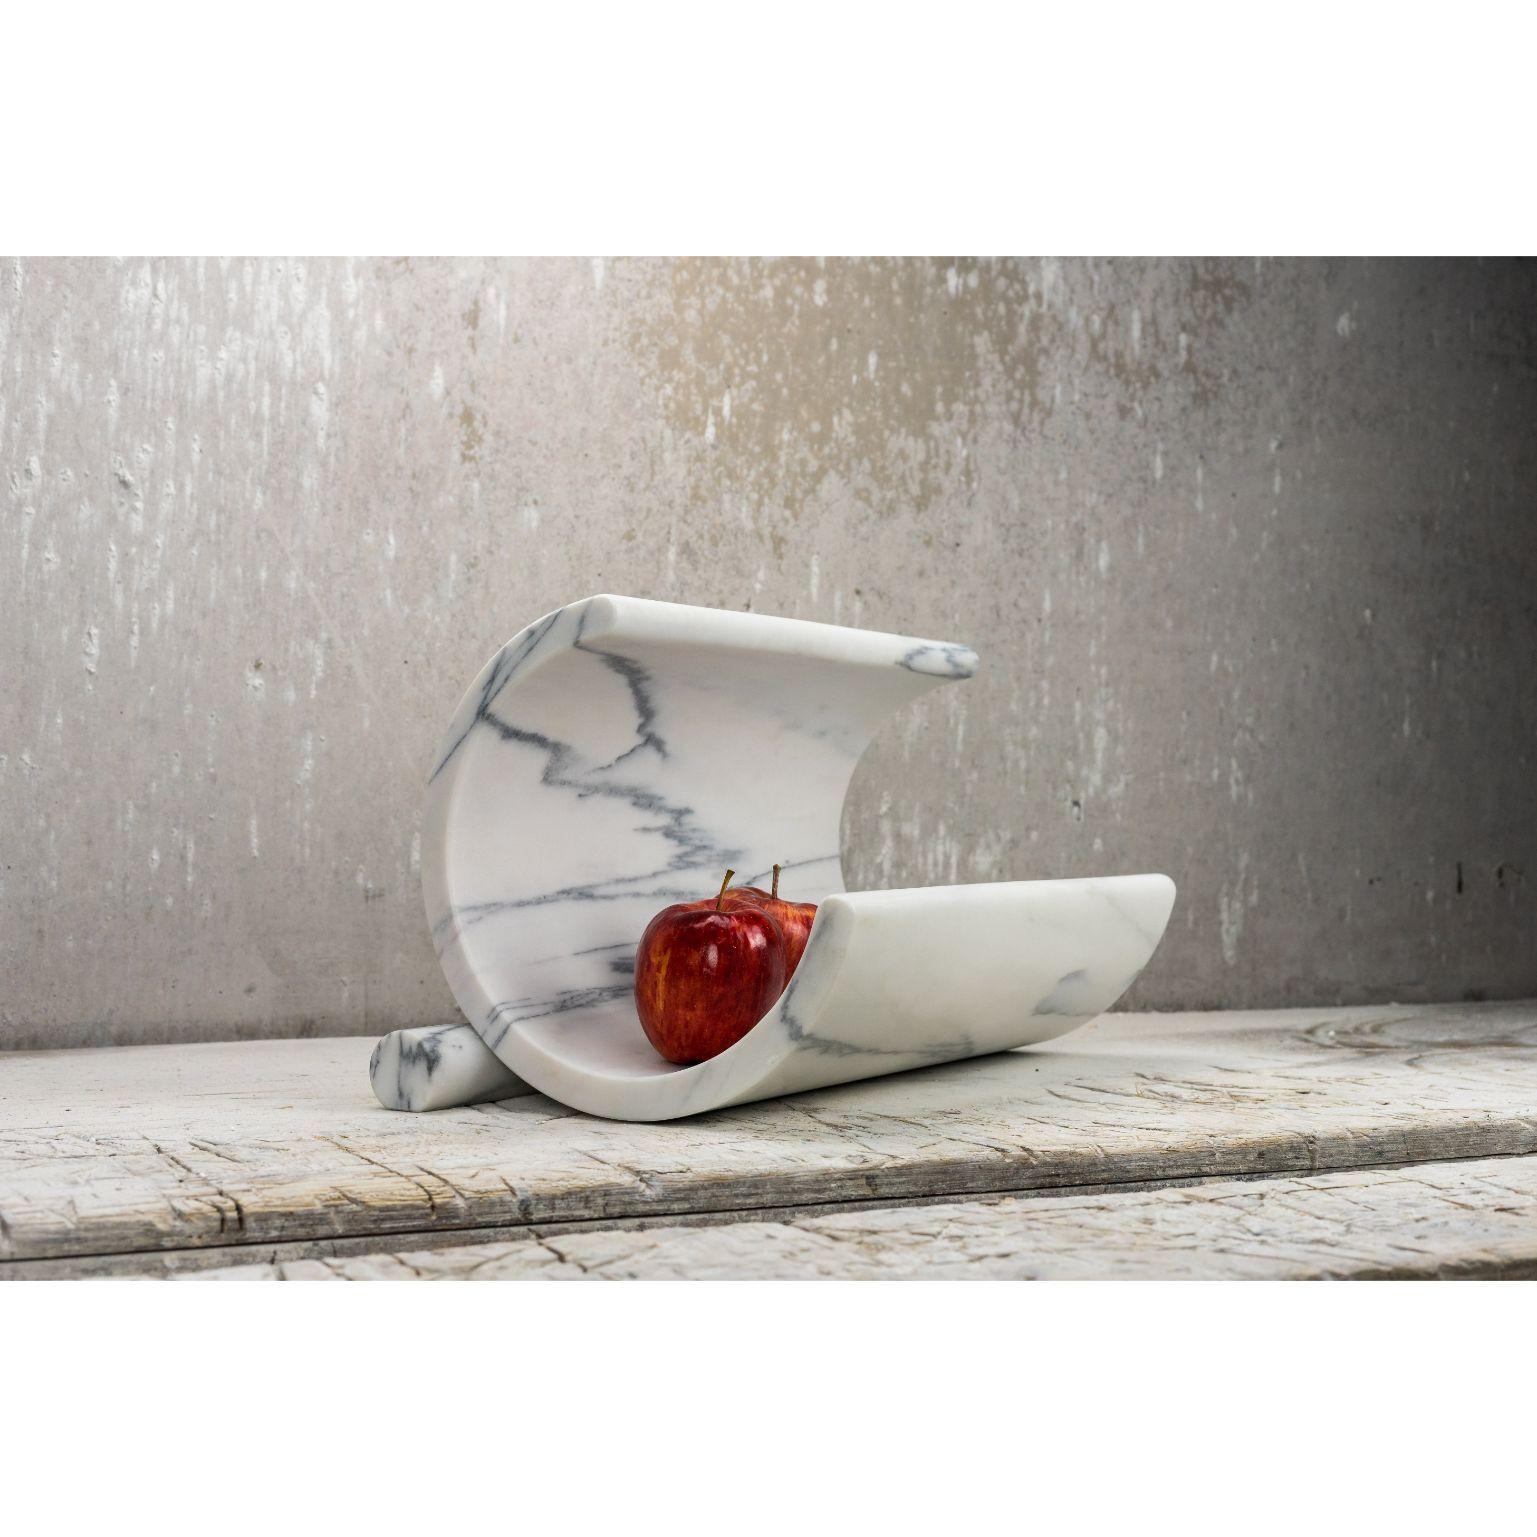 Balanced marble fruit bowl by Essenzia
Materials: Carrara, pele de tigre, estremoz white
Dimensions: 25 x 40 cm

Sculptural hand-finished fruit bowl made from a solid piece of marble. It´s an elegant object that can be used as a fruit container